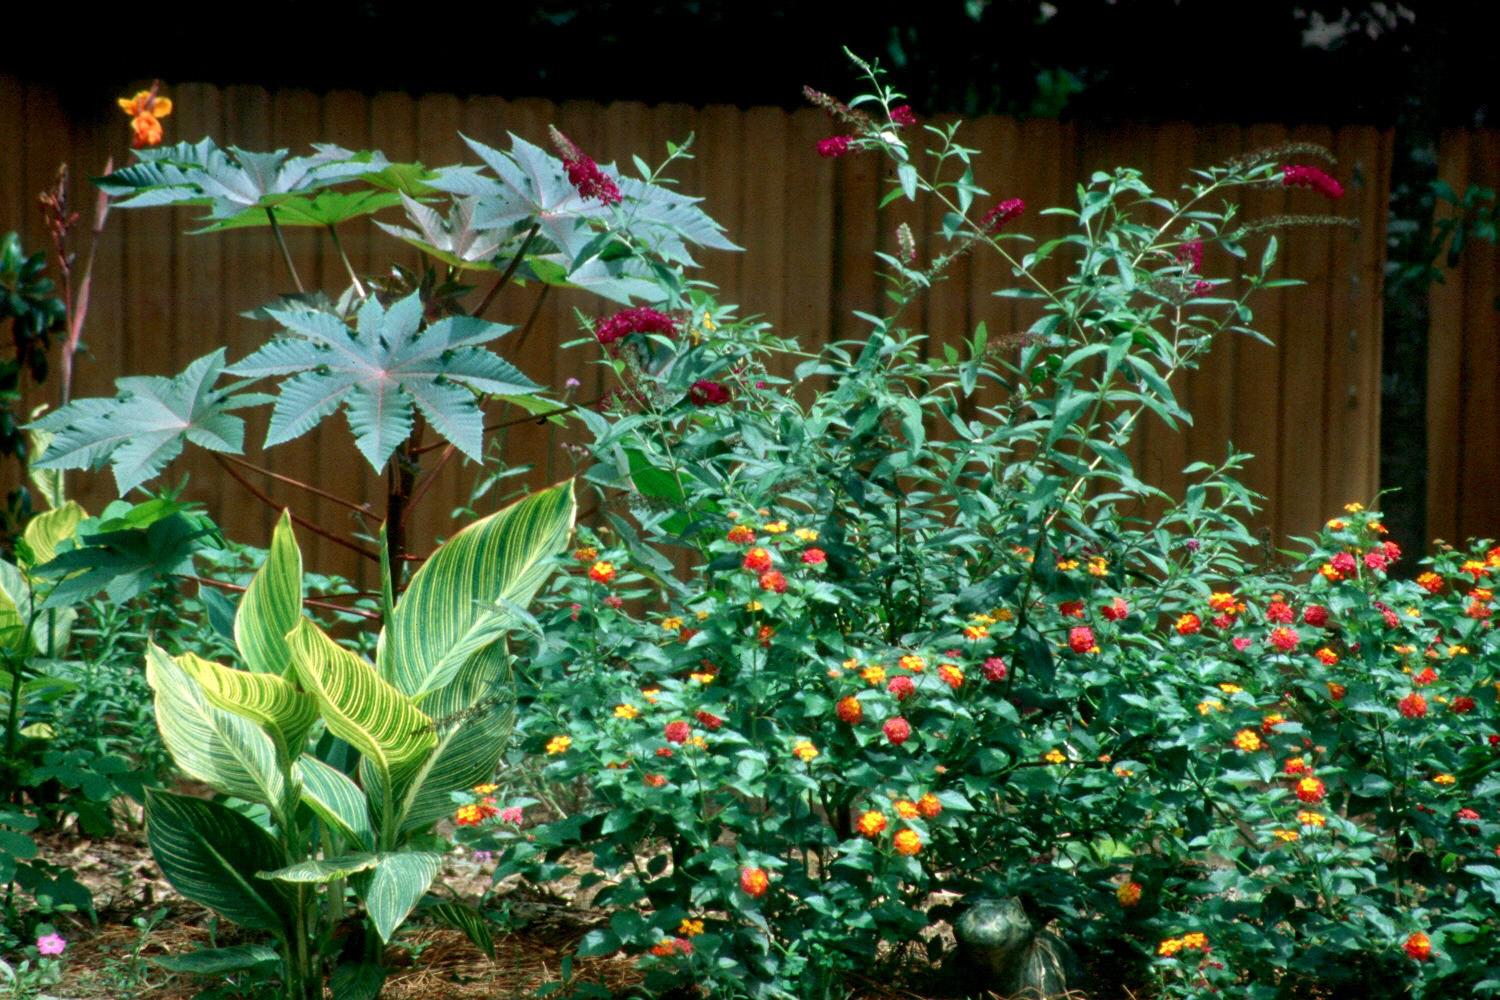 The castor bean with its large palante leaves looks exotic and tropical in this garden with cannas, lantana and buddleia.